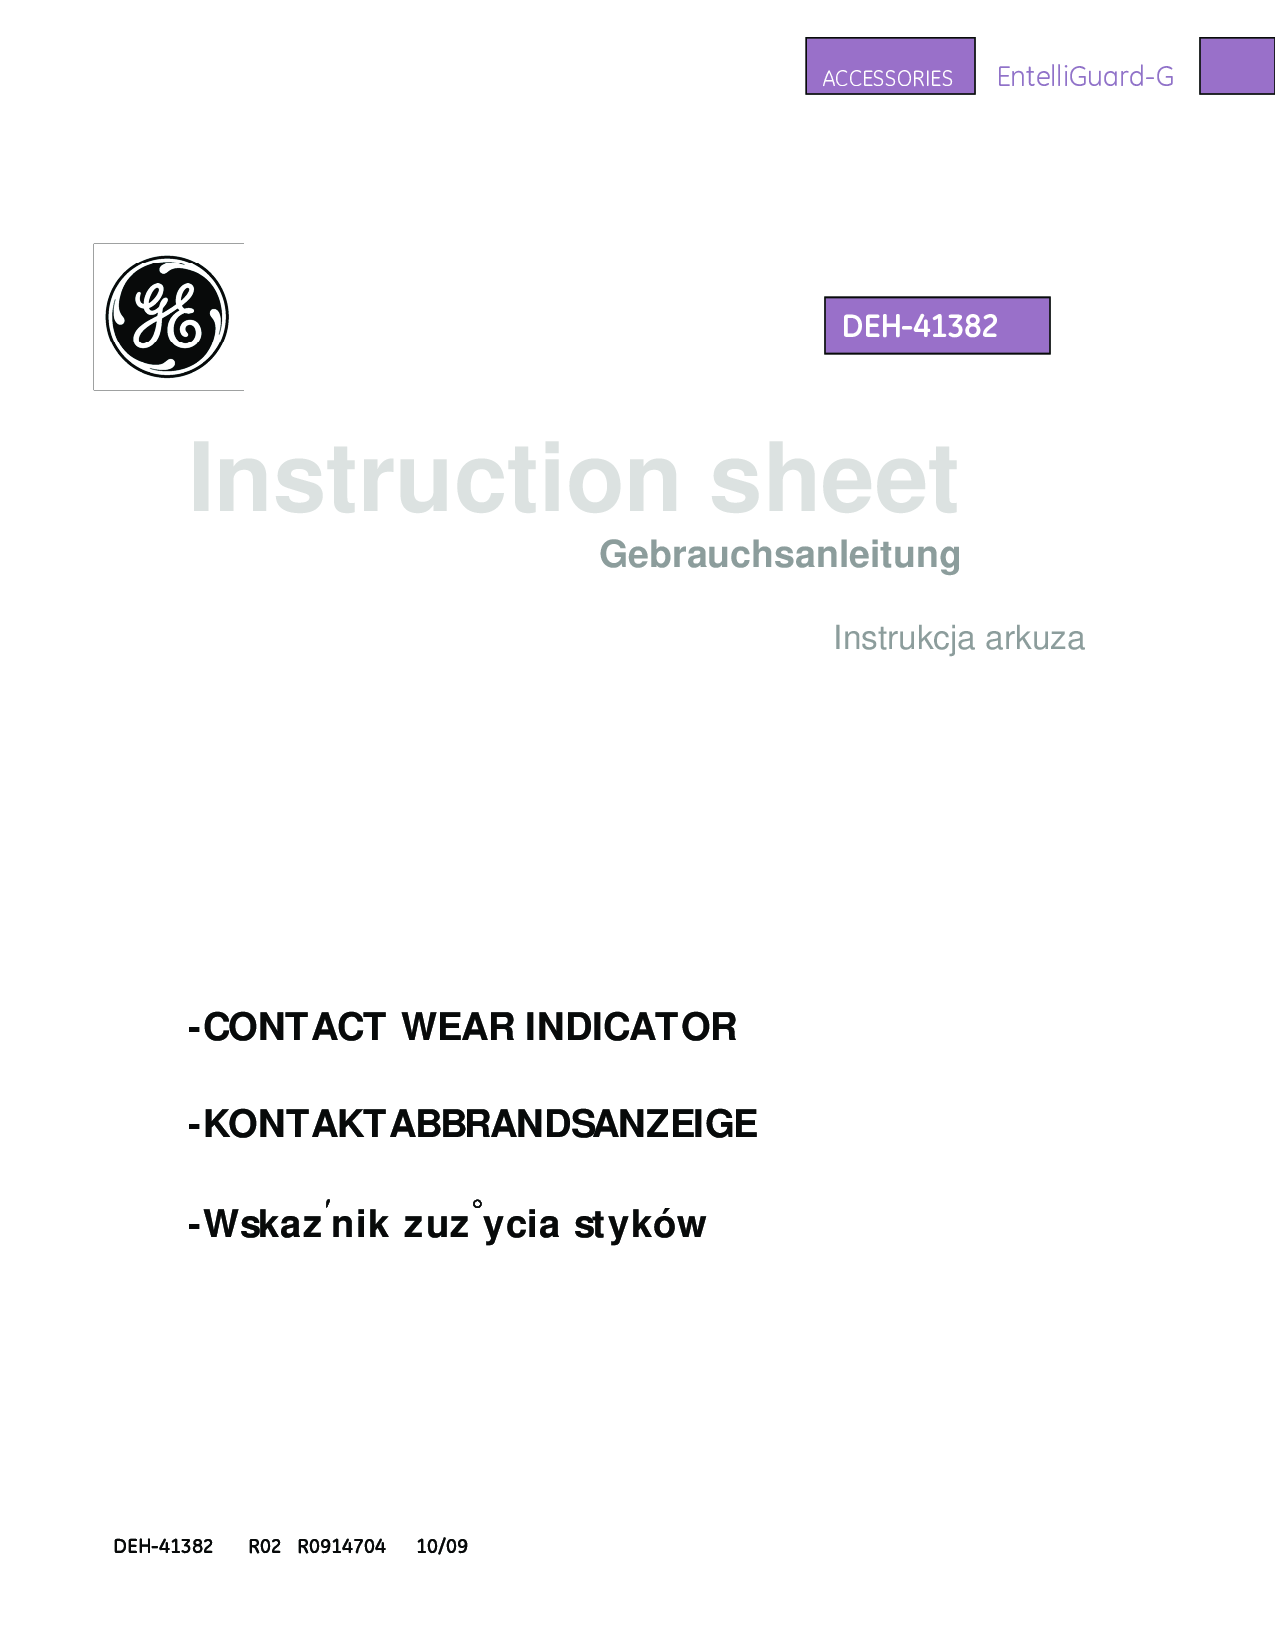 GE Industrial Solutions EntelliGuard G Contact Wear Indicator User Manual